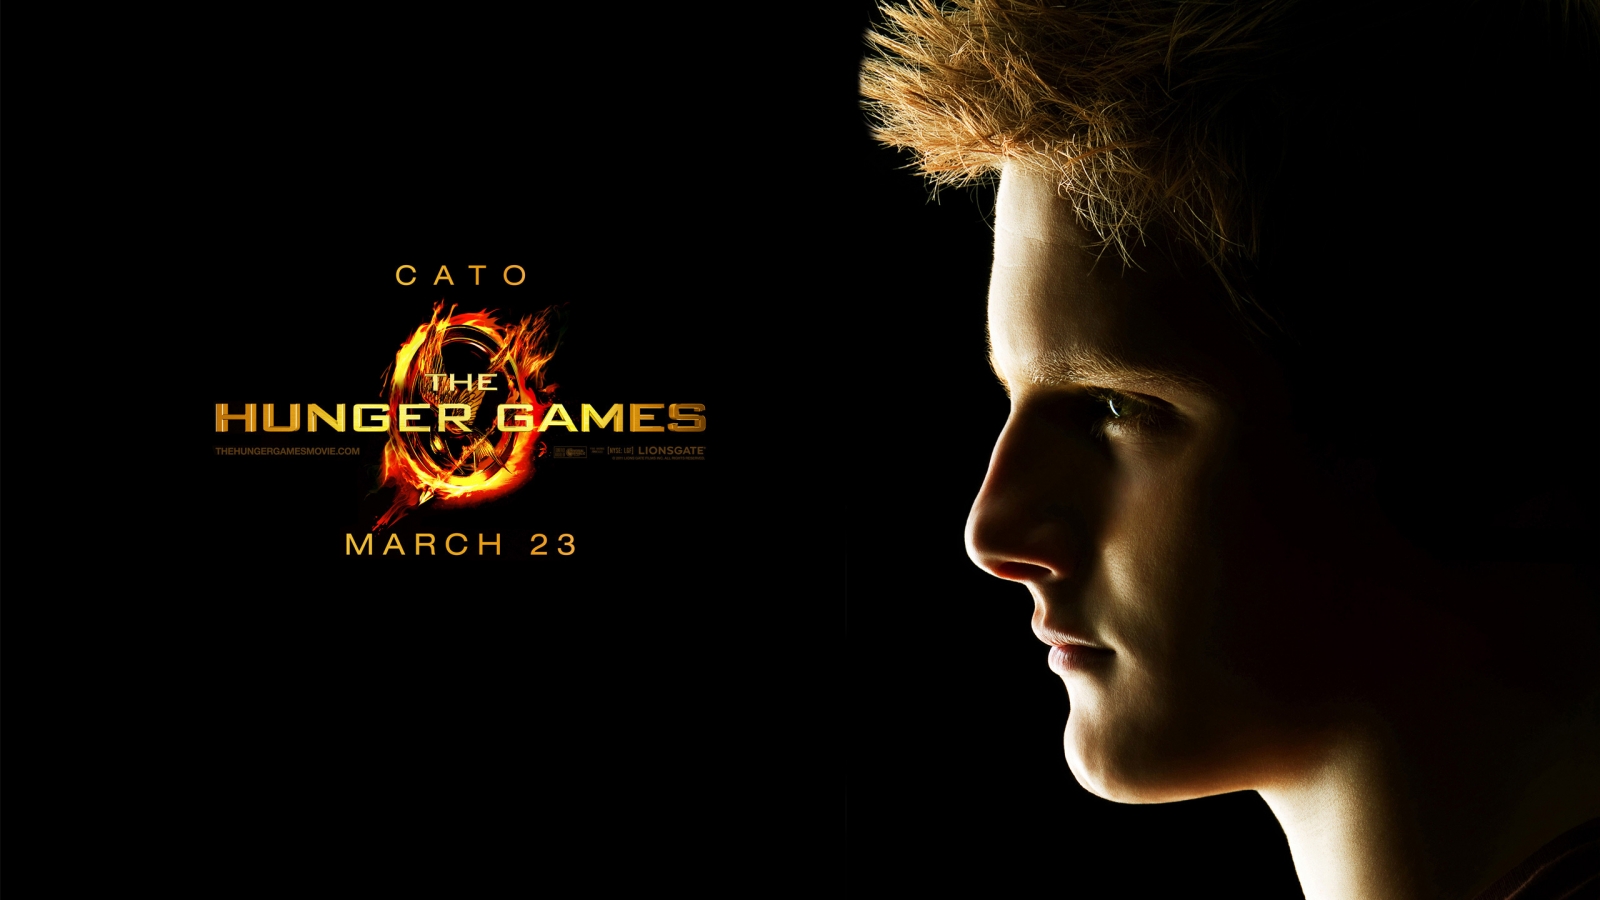 The Hunger Games Cato for 1600 x 900 HDTV resolution